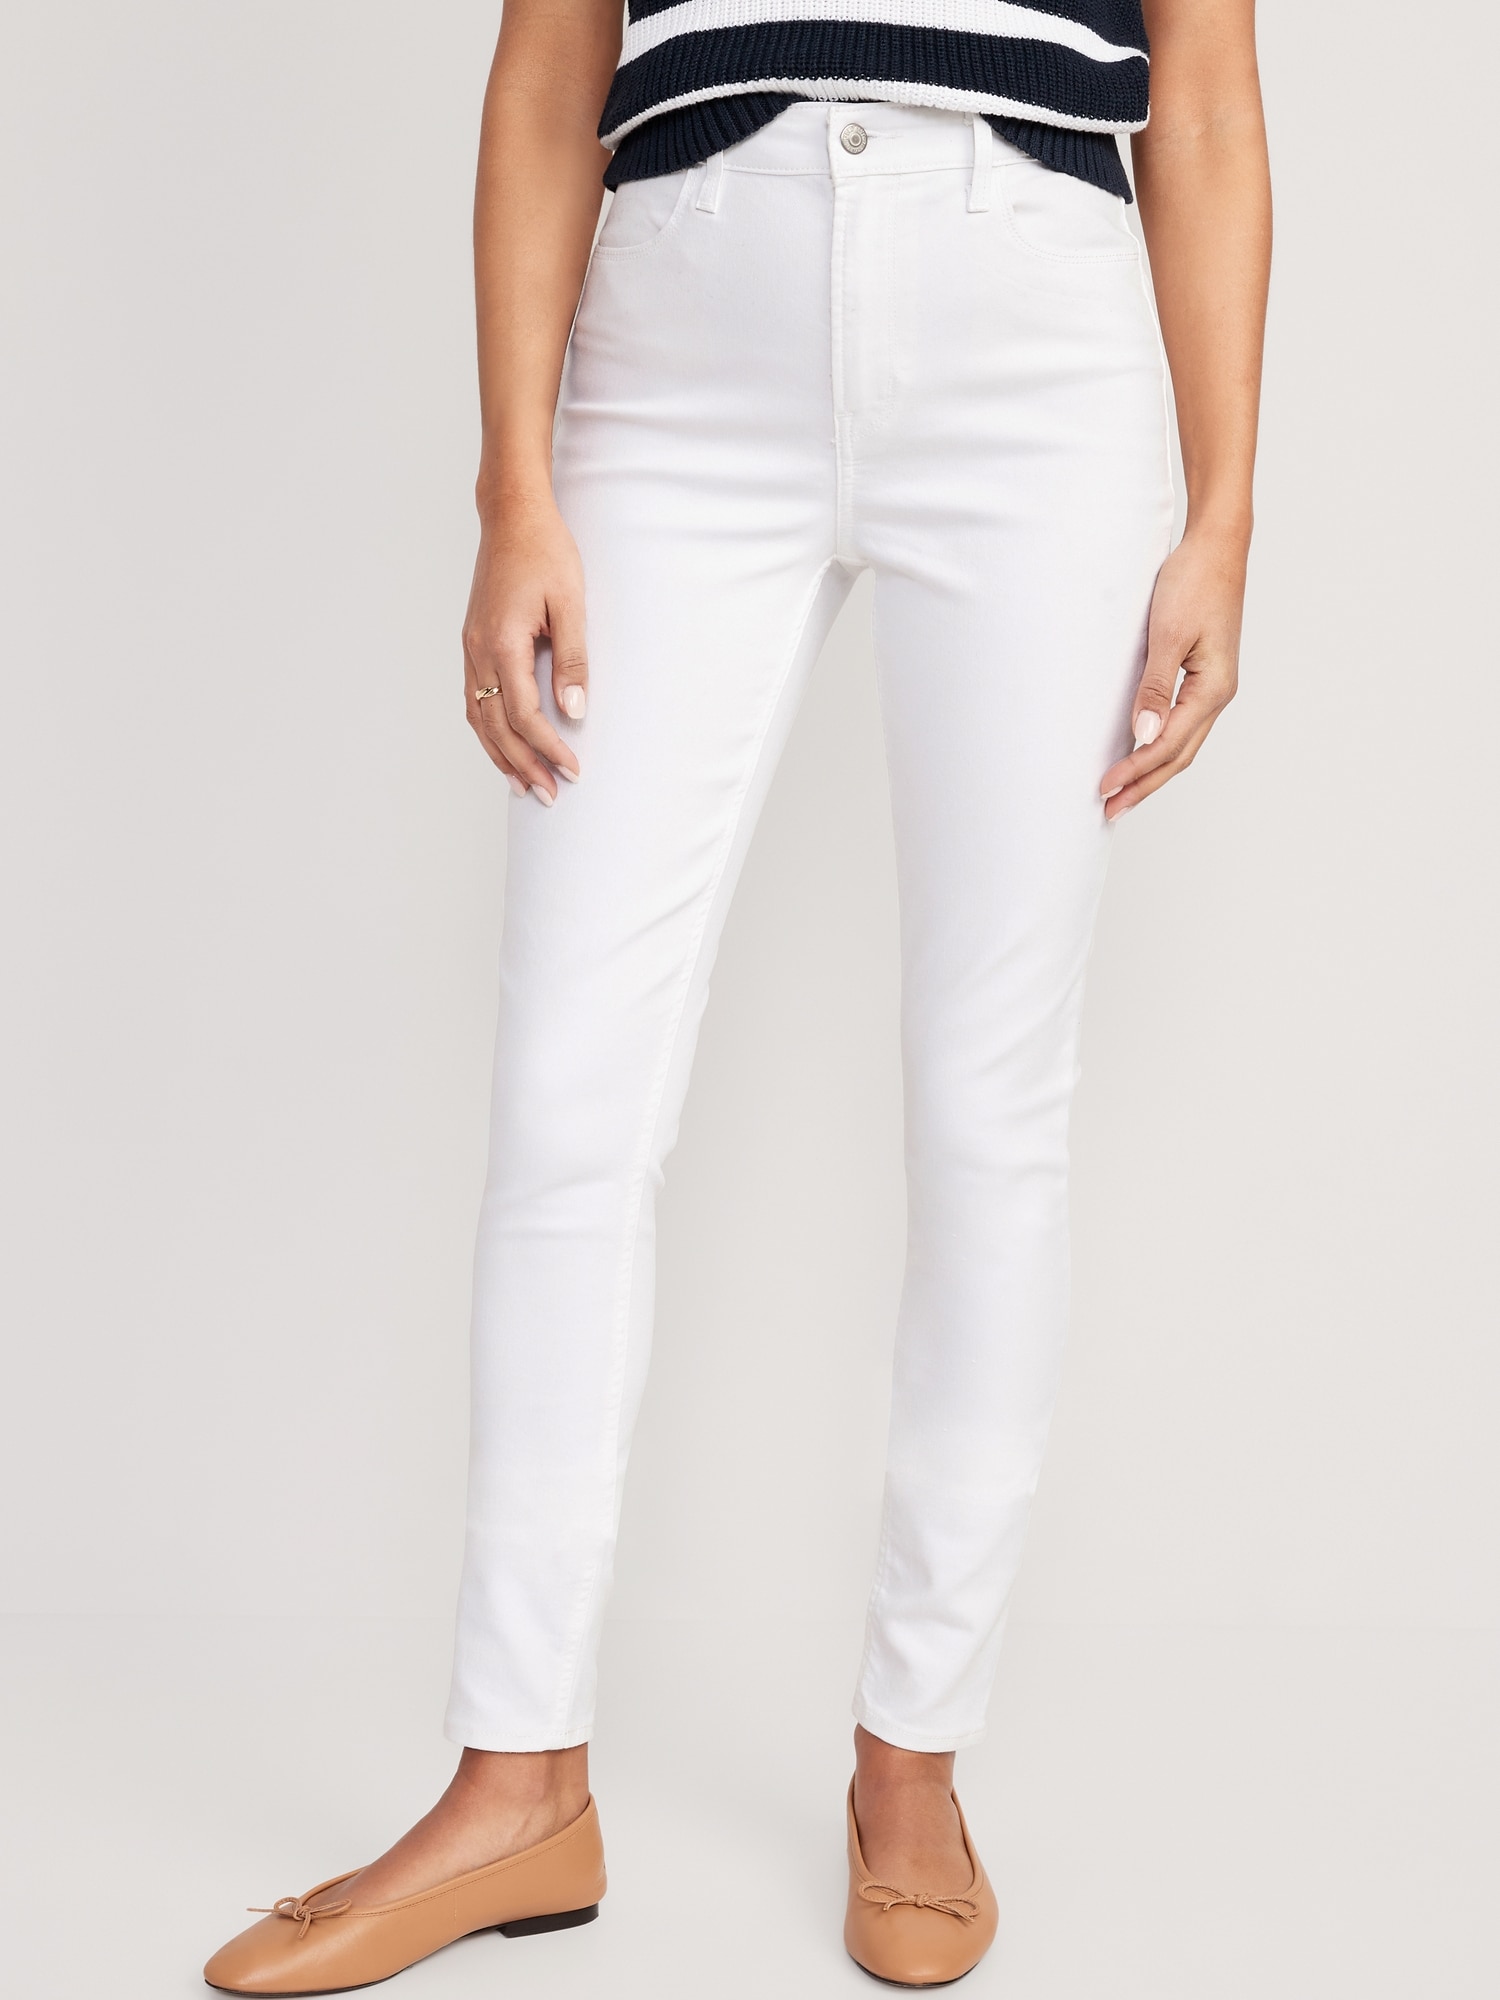 High-Waisted Wow Super-Skinny Jeans for Women